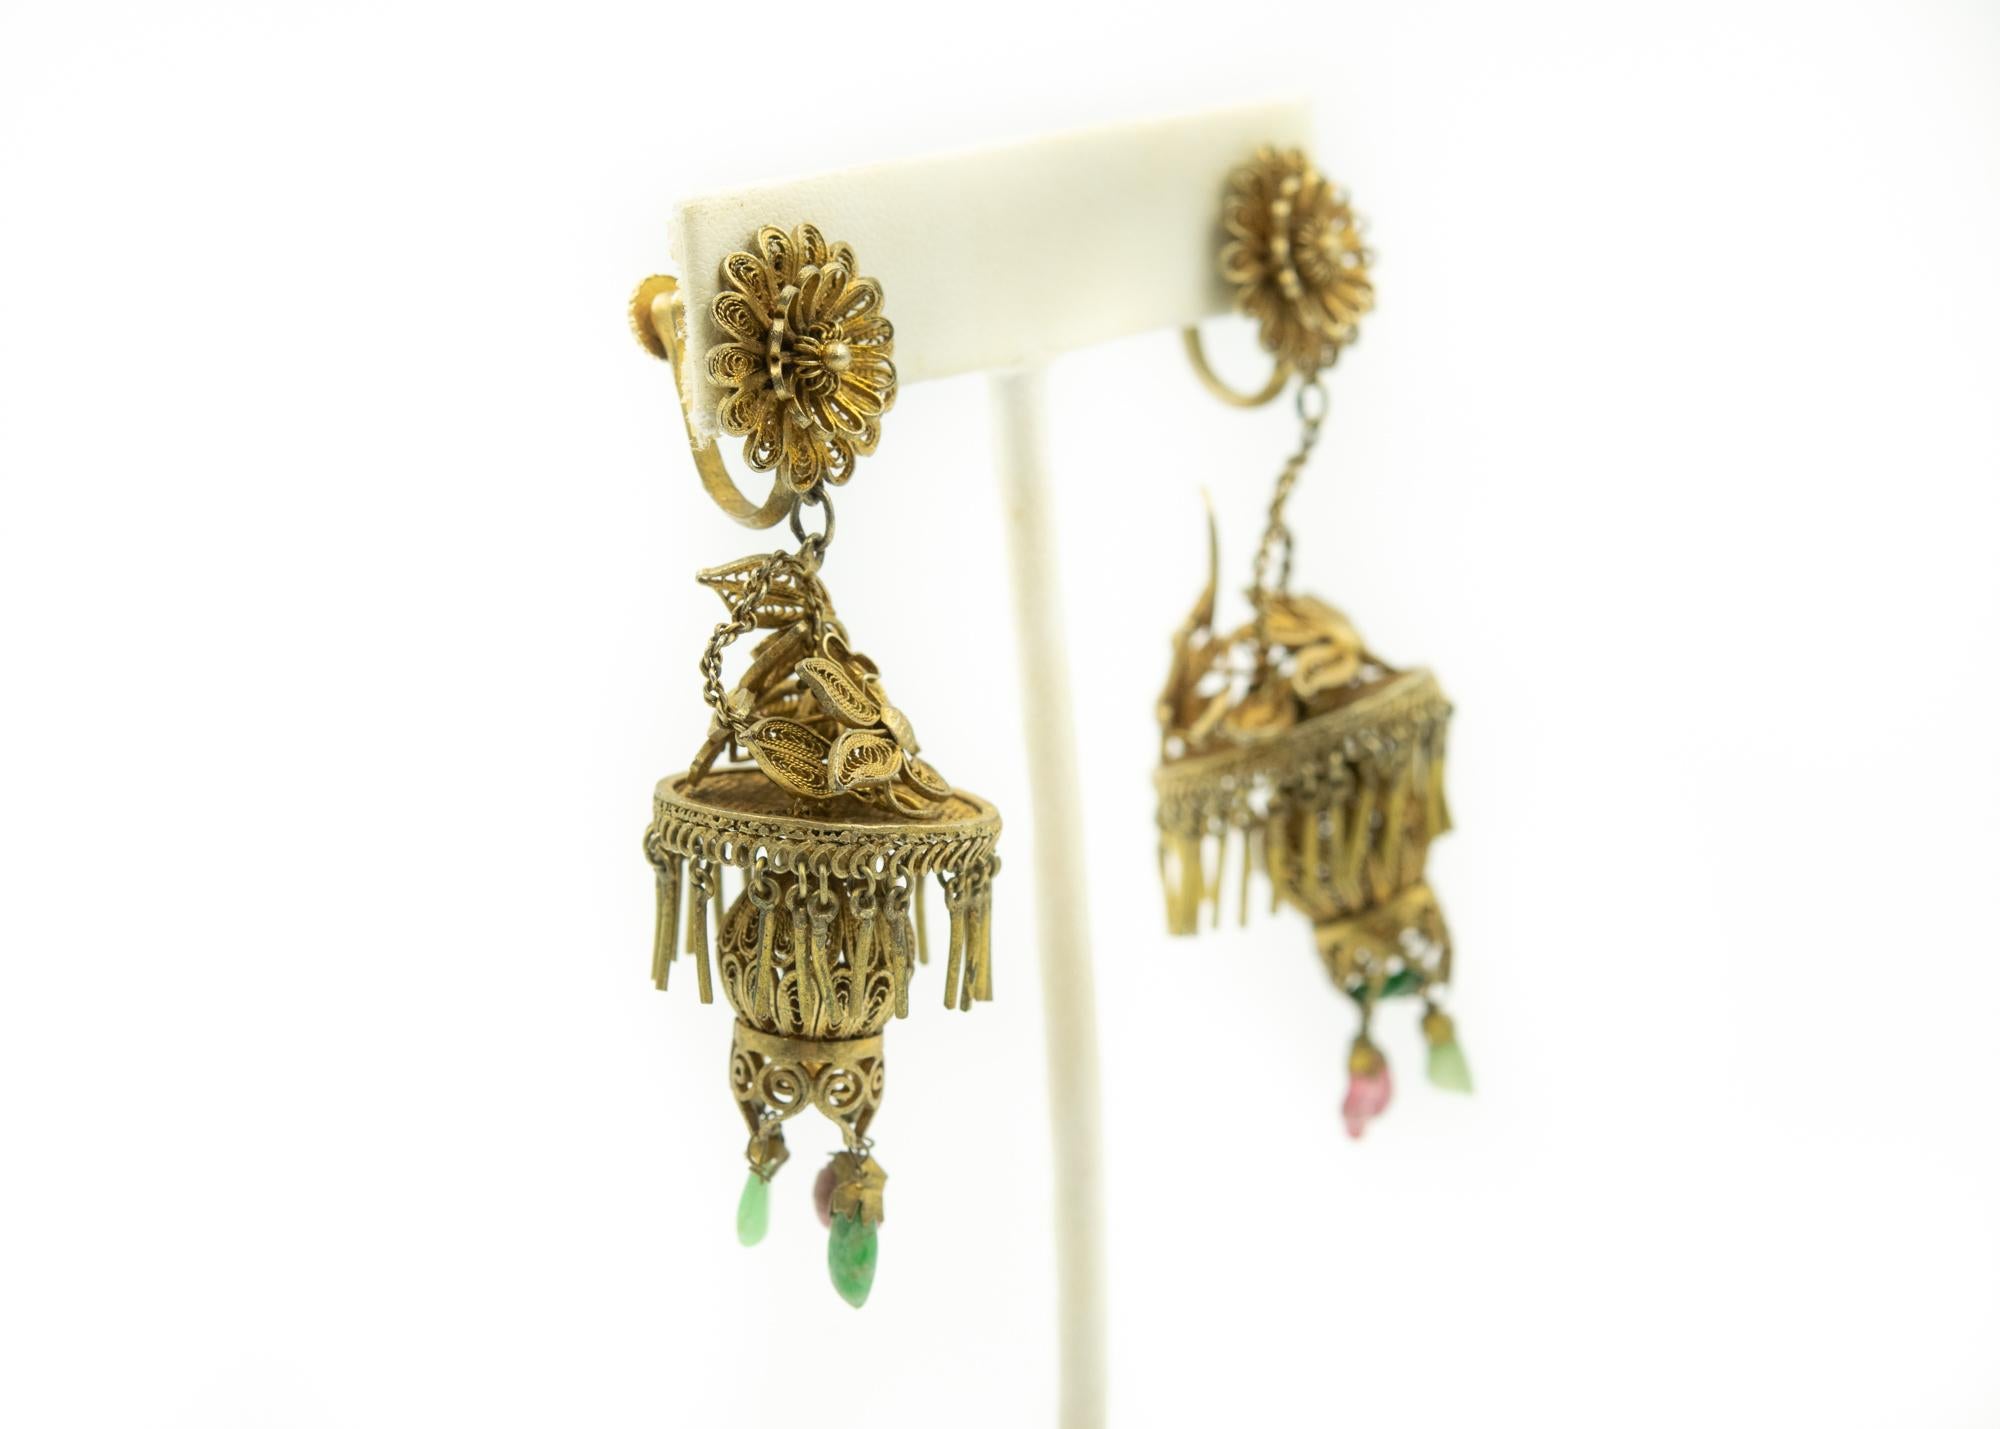 These early 20th century gilt sterling silver earrings are in the form of Chinese lanterns.  They feature 2 levels of dangling drops which sway with every movement.  The top layer are fringe and the bottom has pink tourmalines and green jades drops.